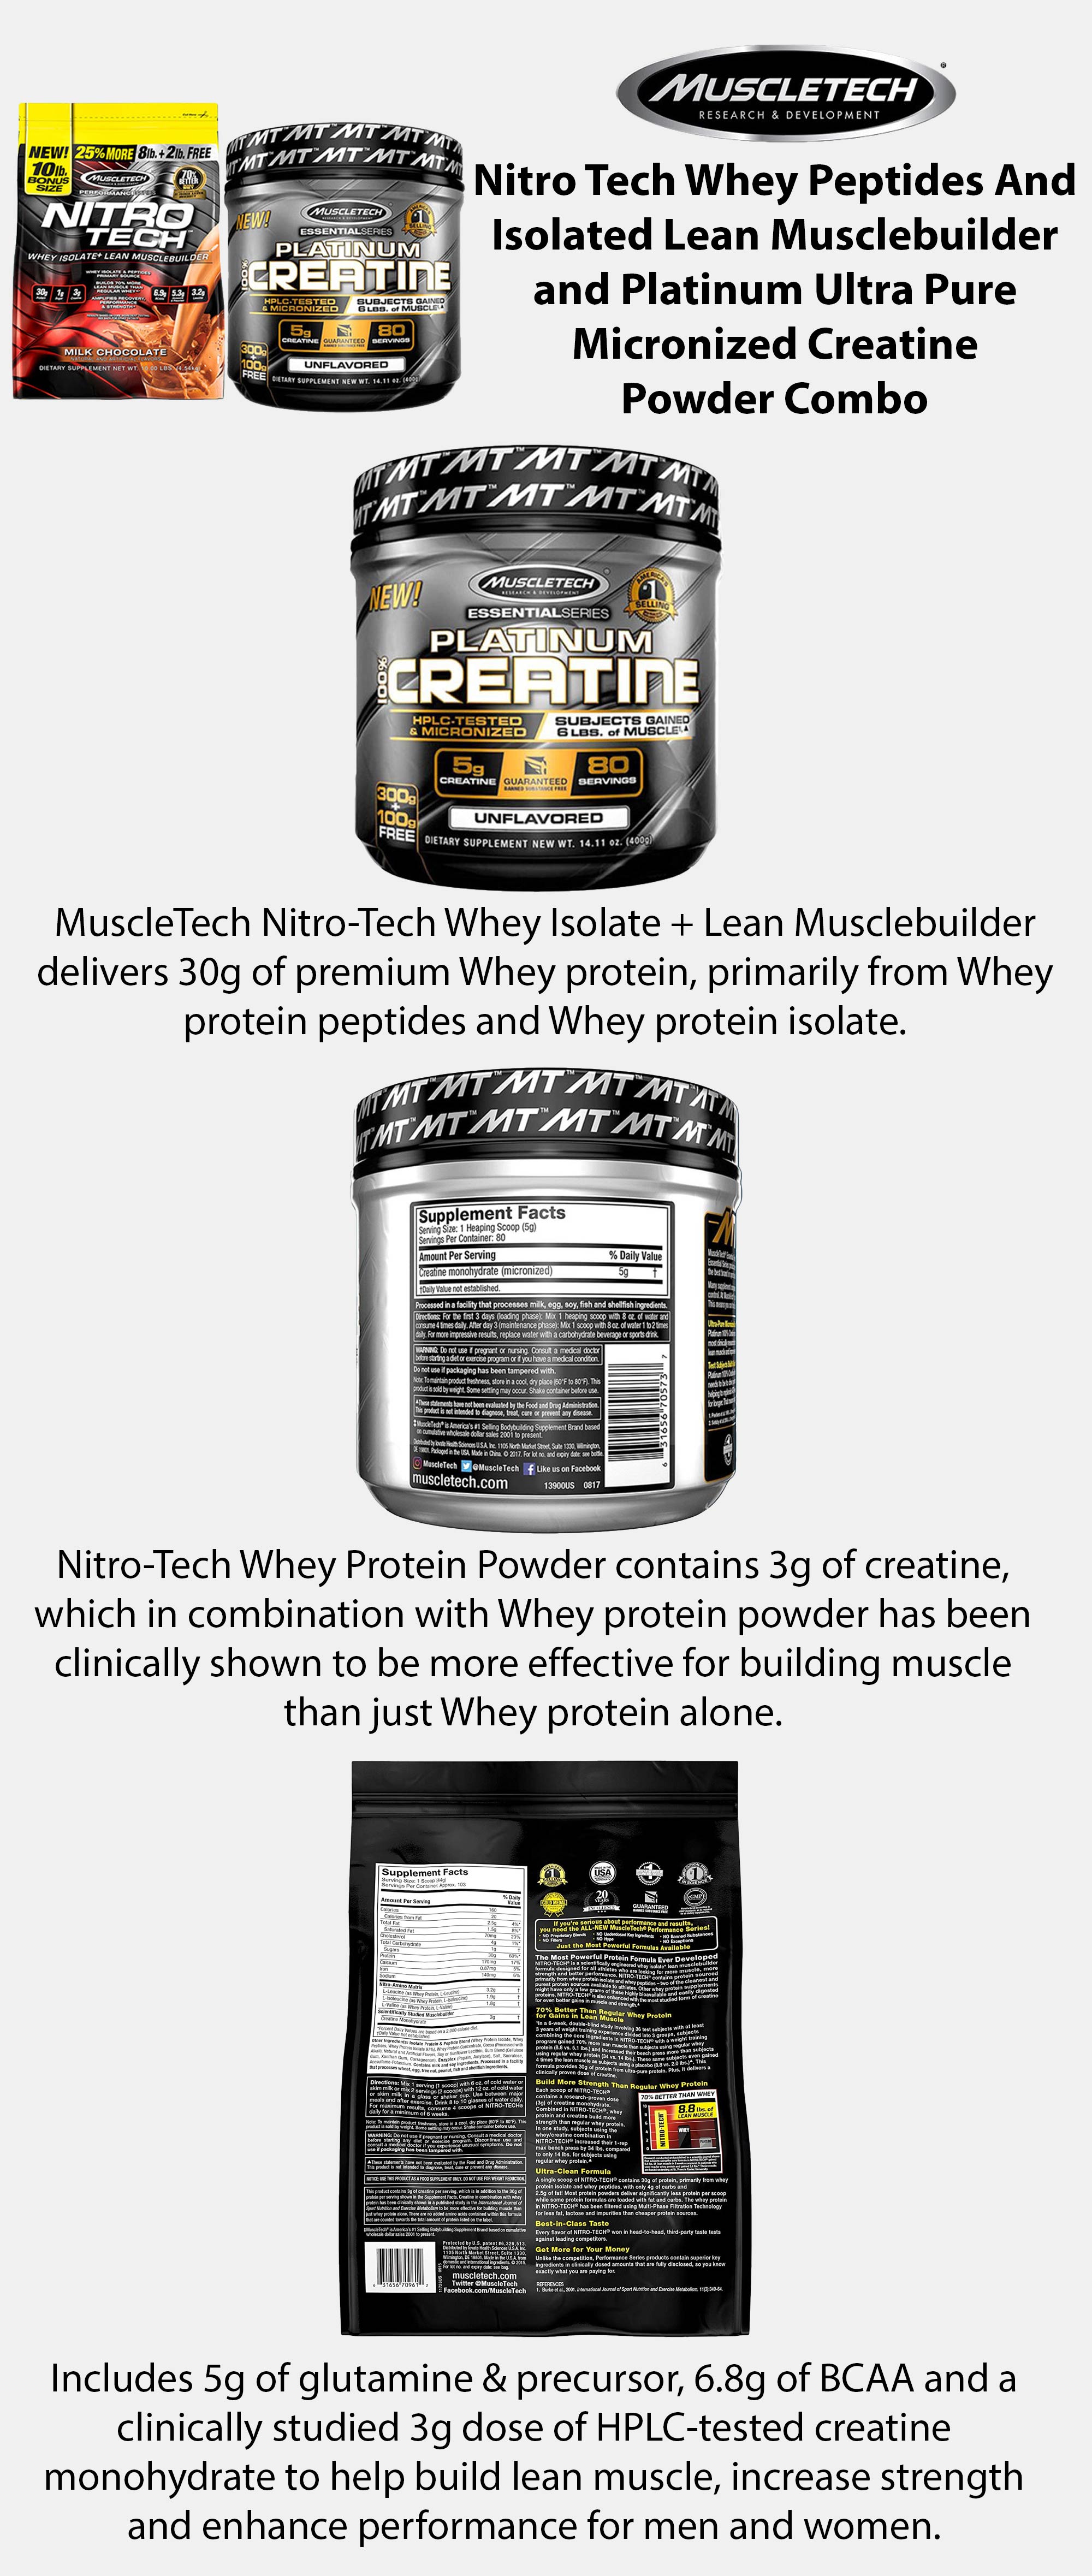 Nitro TechWhey Peptides And Isolated Lean Musclebuilder and Platinum Ultra Pure Micronized Creatine Powder Combo